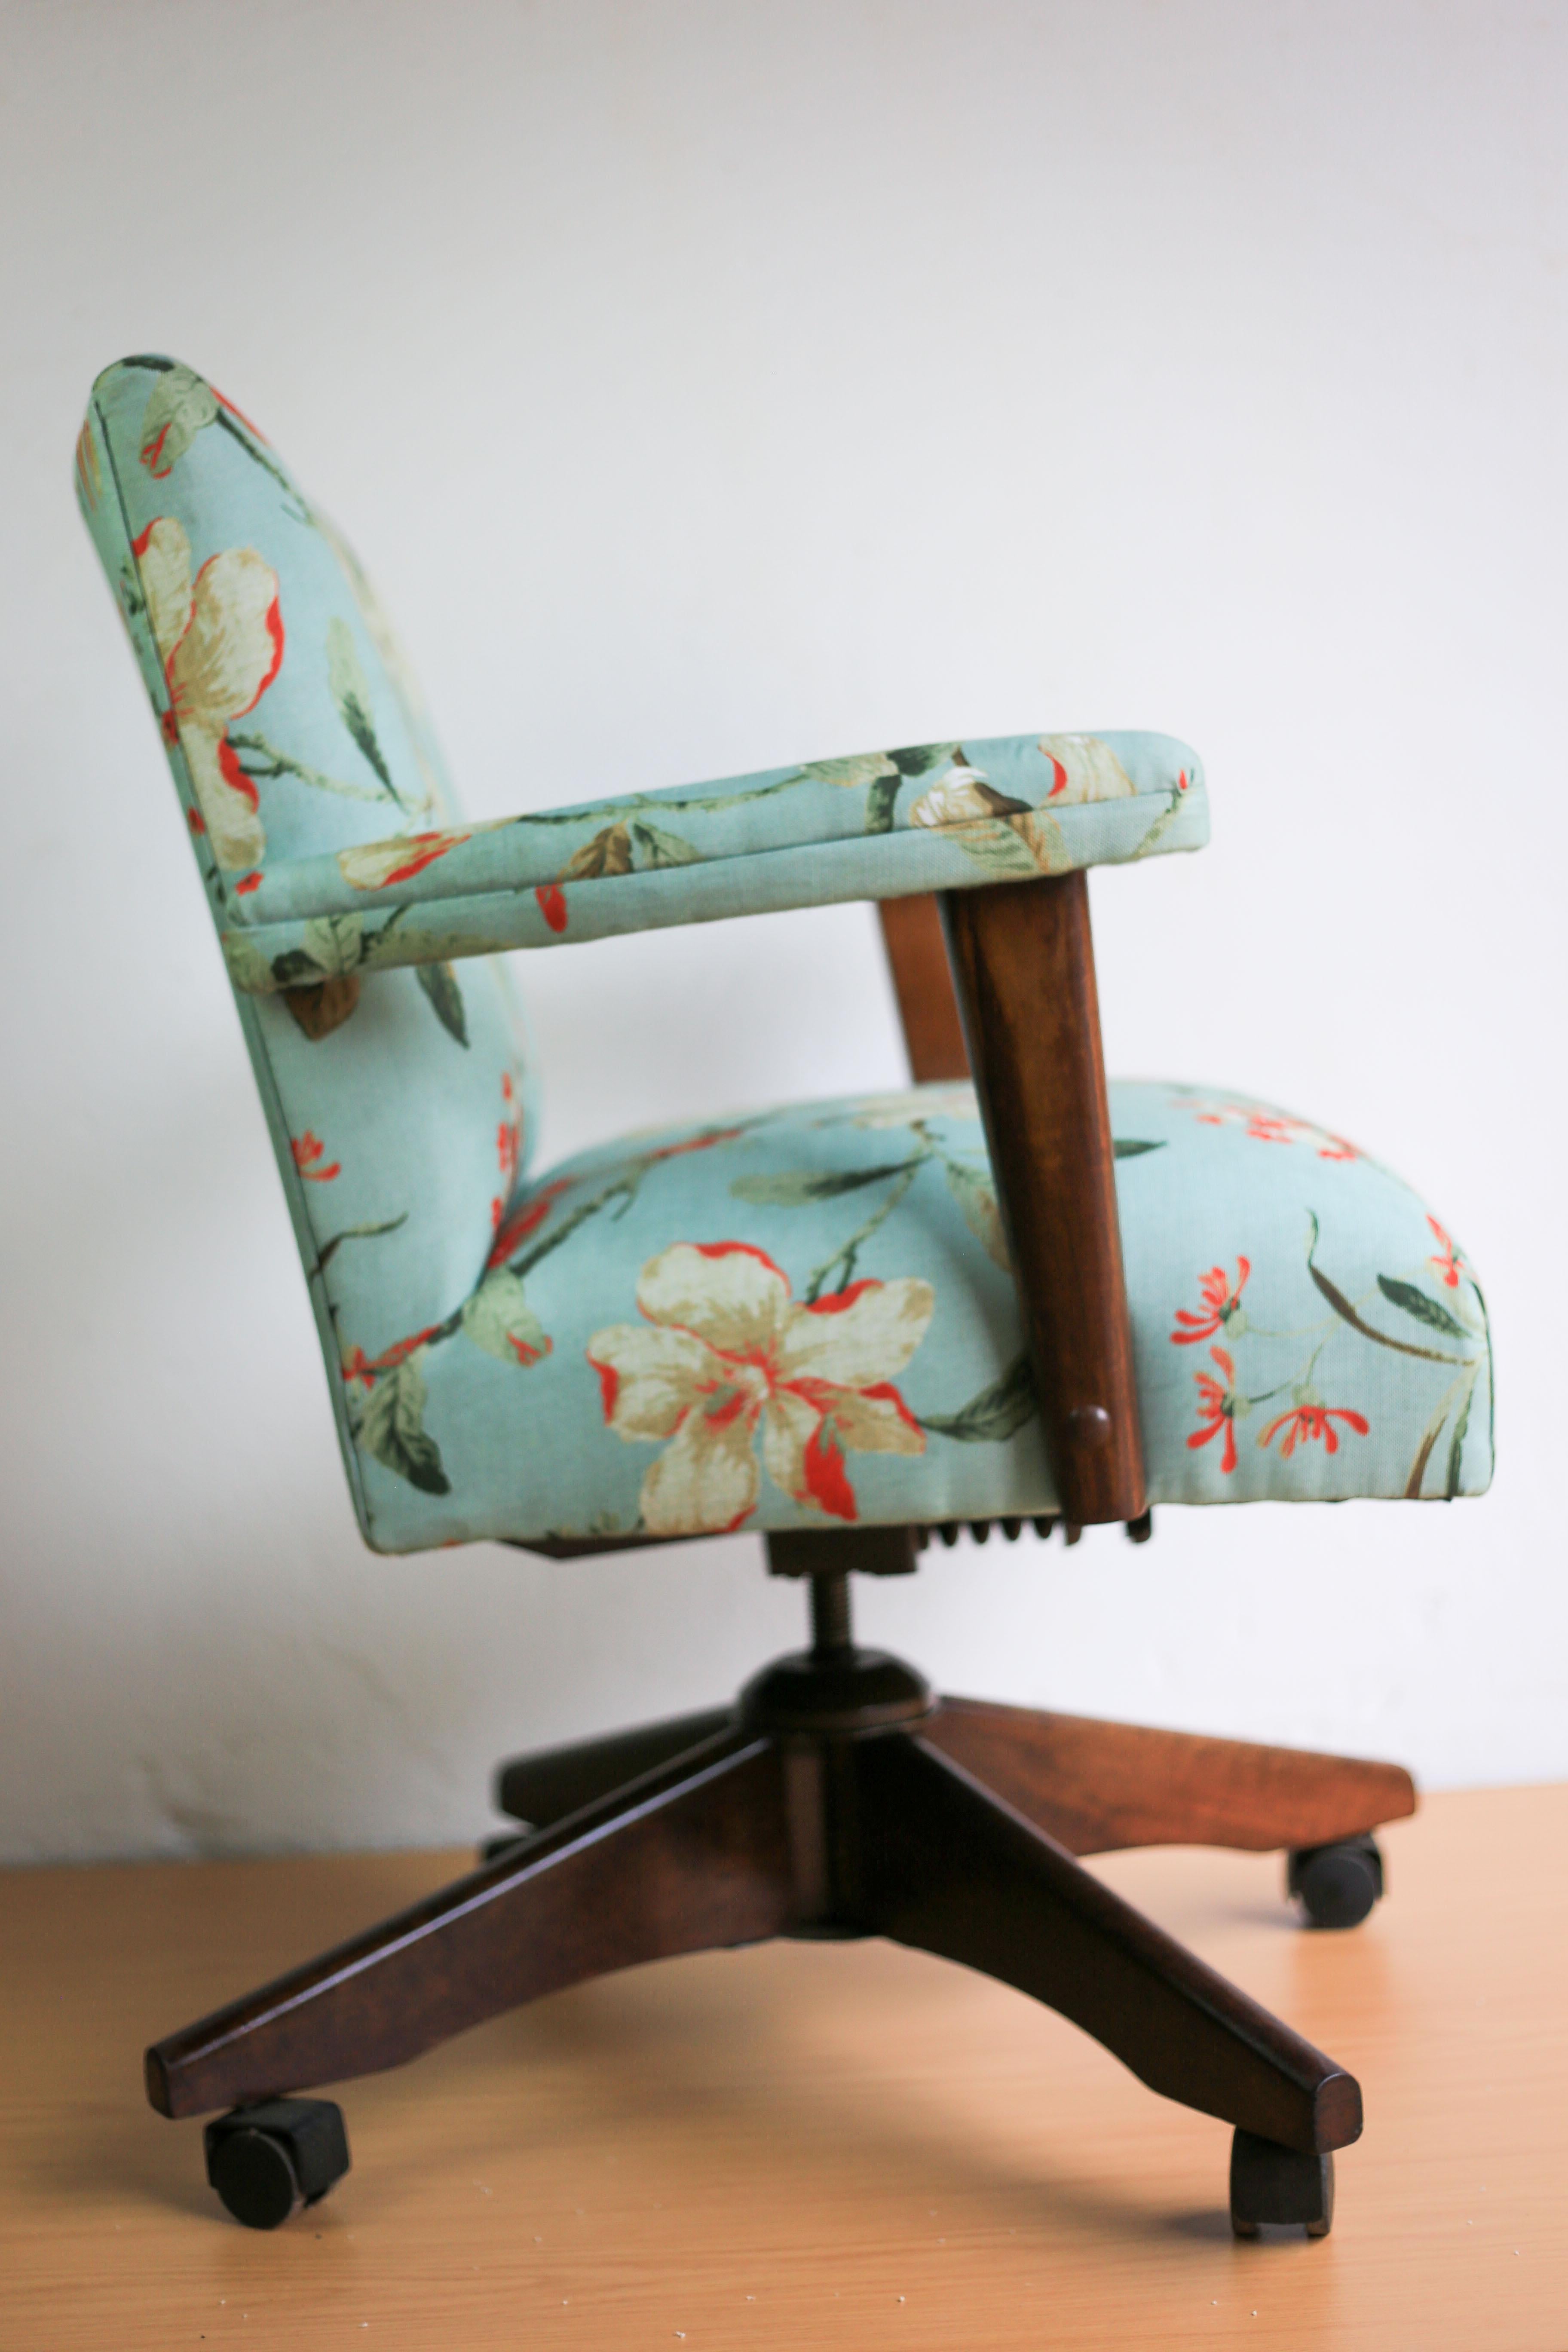 A very comfortable, early 20th century office chair with a strong wood base and arms. It is recovered in a floral linen type fabric by UK fabric design house, Laura Ashley. The chair can swivel, tilt and is height adjustable. It moves freely on four